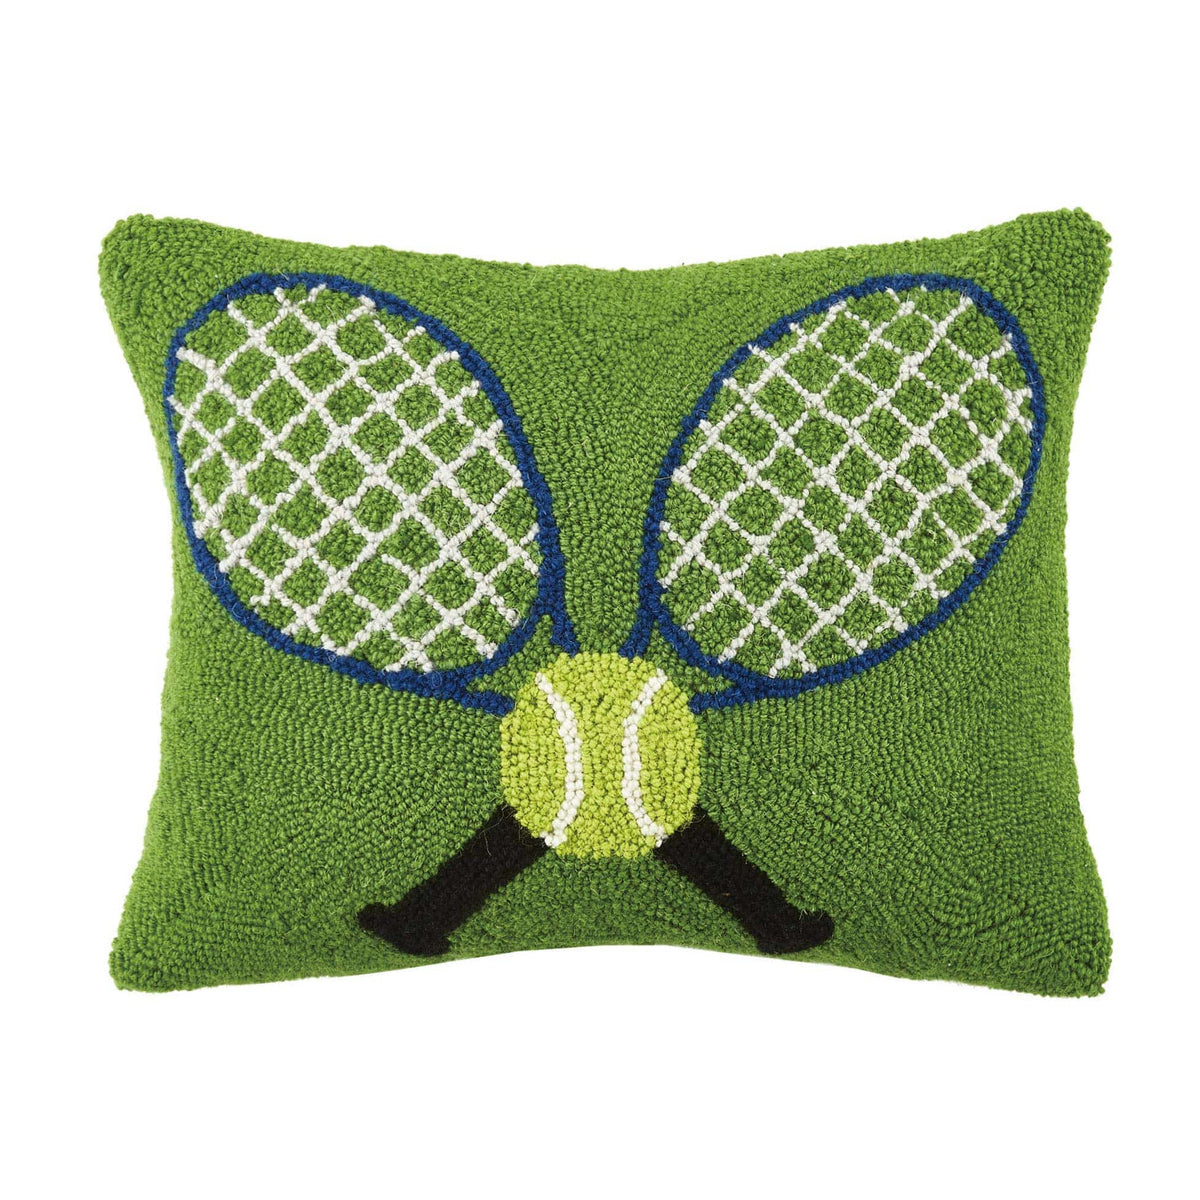 Crossed Tennis Racquets Hook Pillow - The Preppy Bunny